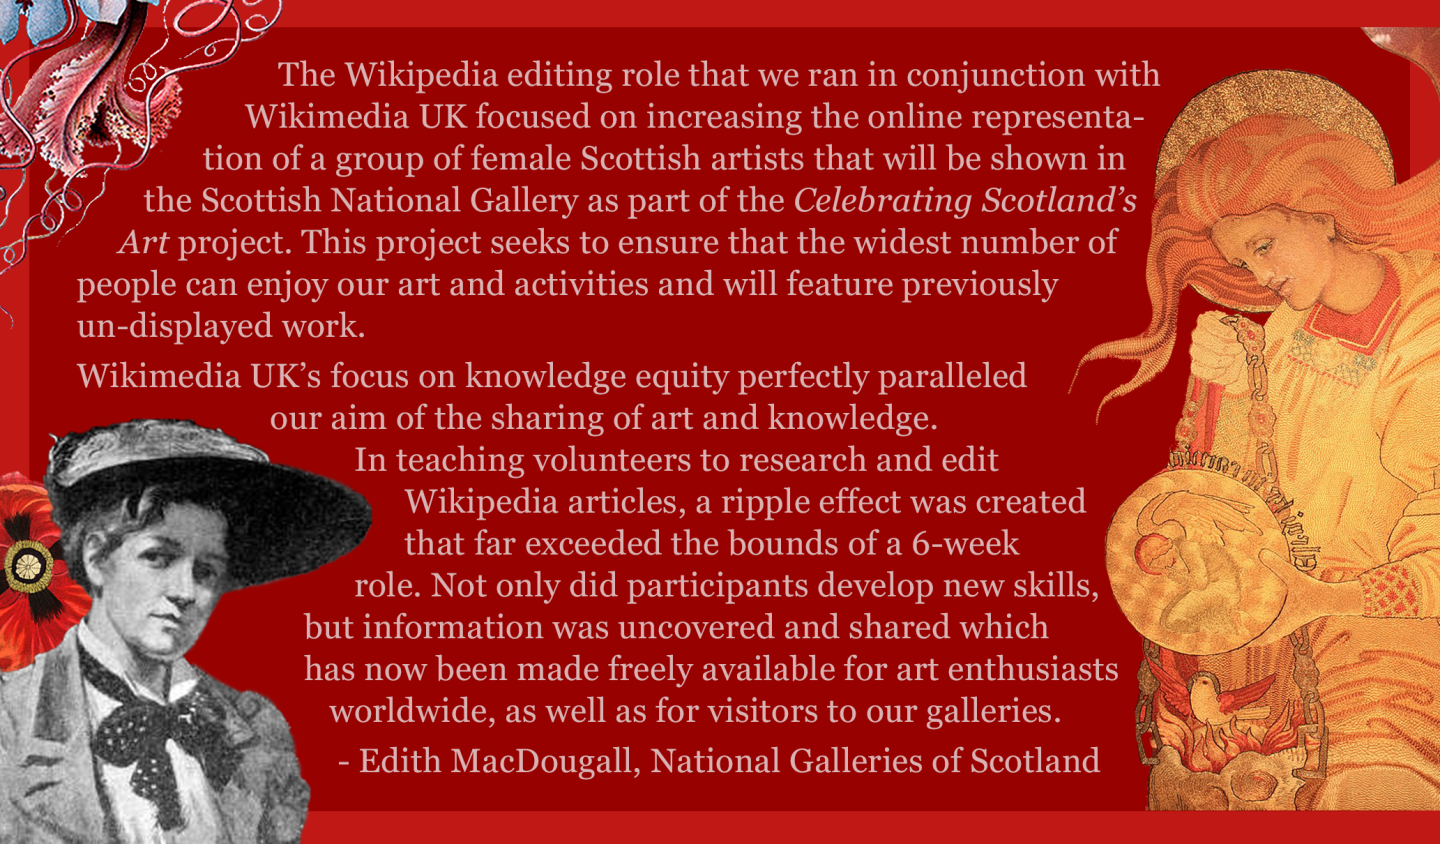 Quote from Edith MacDougall, partner at the Scottish National Galleries of Scotland